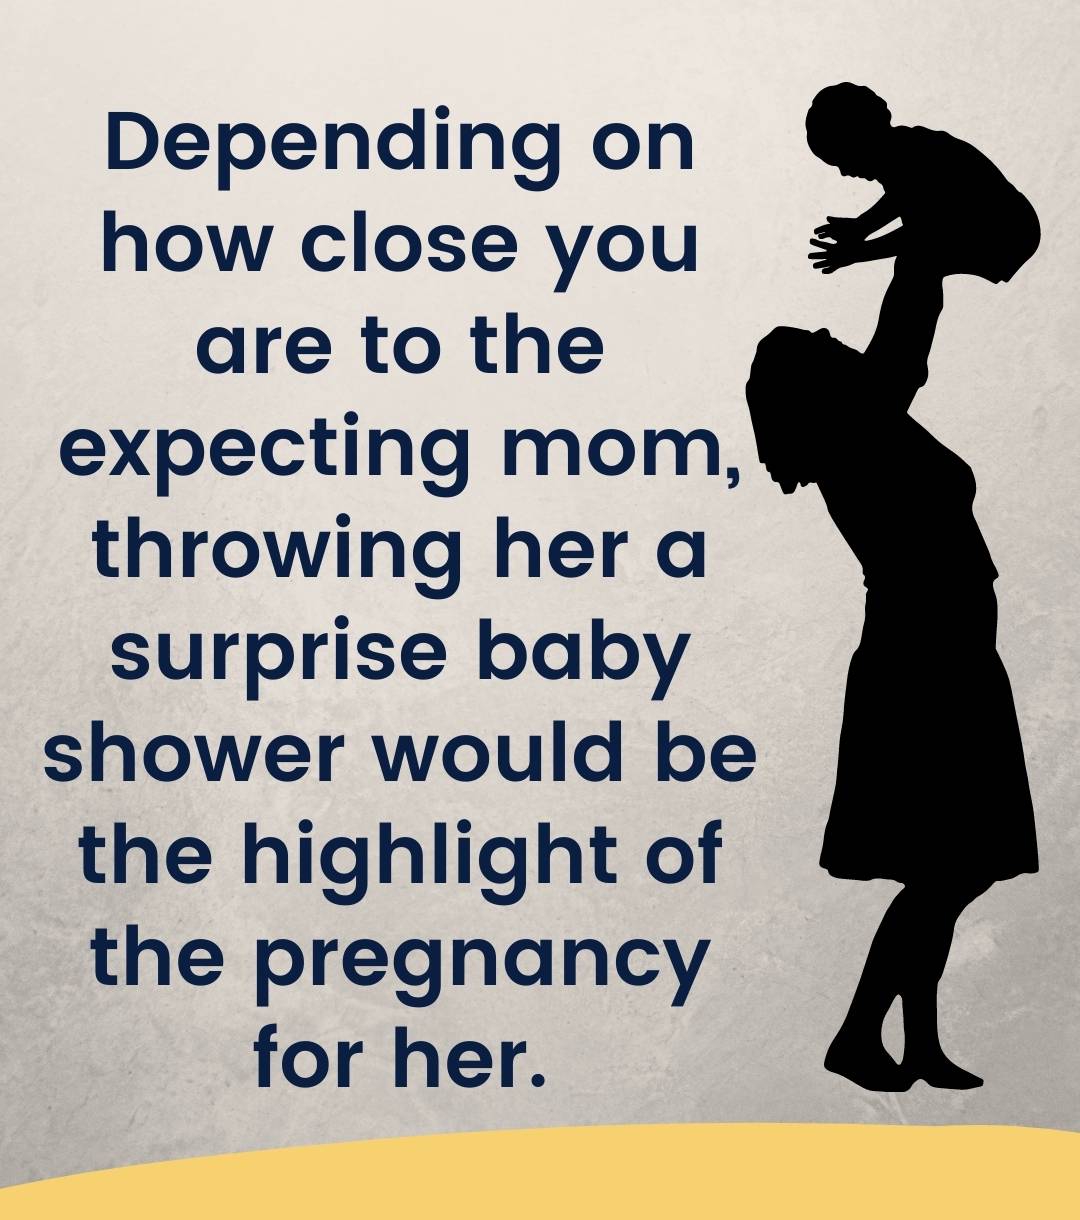 Depending on how close you are to the expecting mom, throwing her a surprise baby shower would be the highlight of the pregnancy for her.